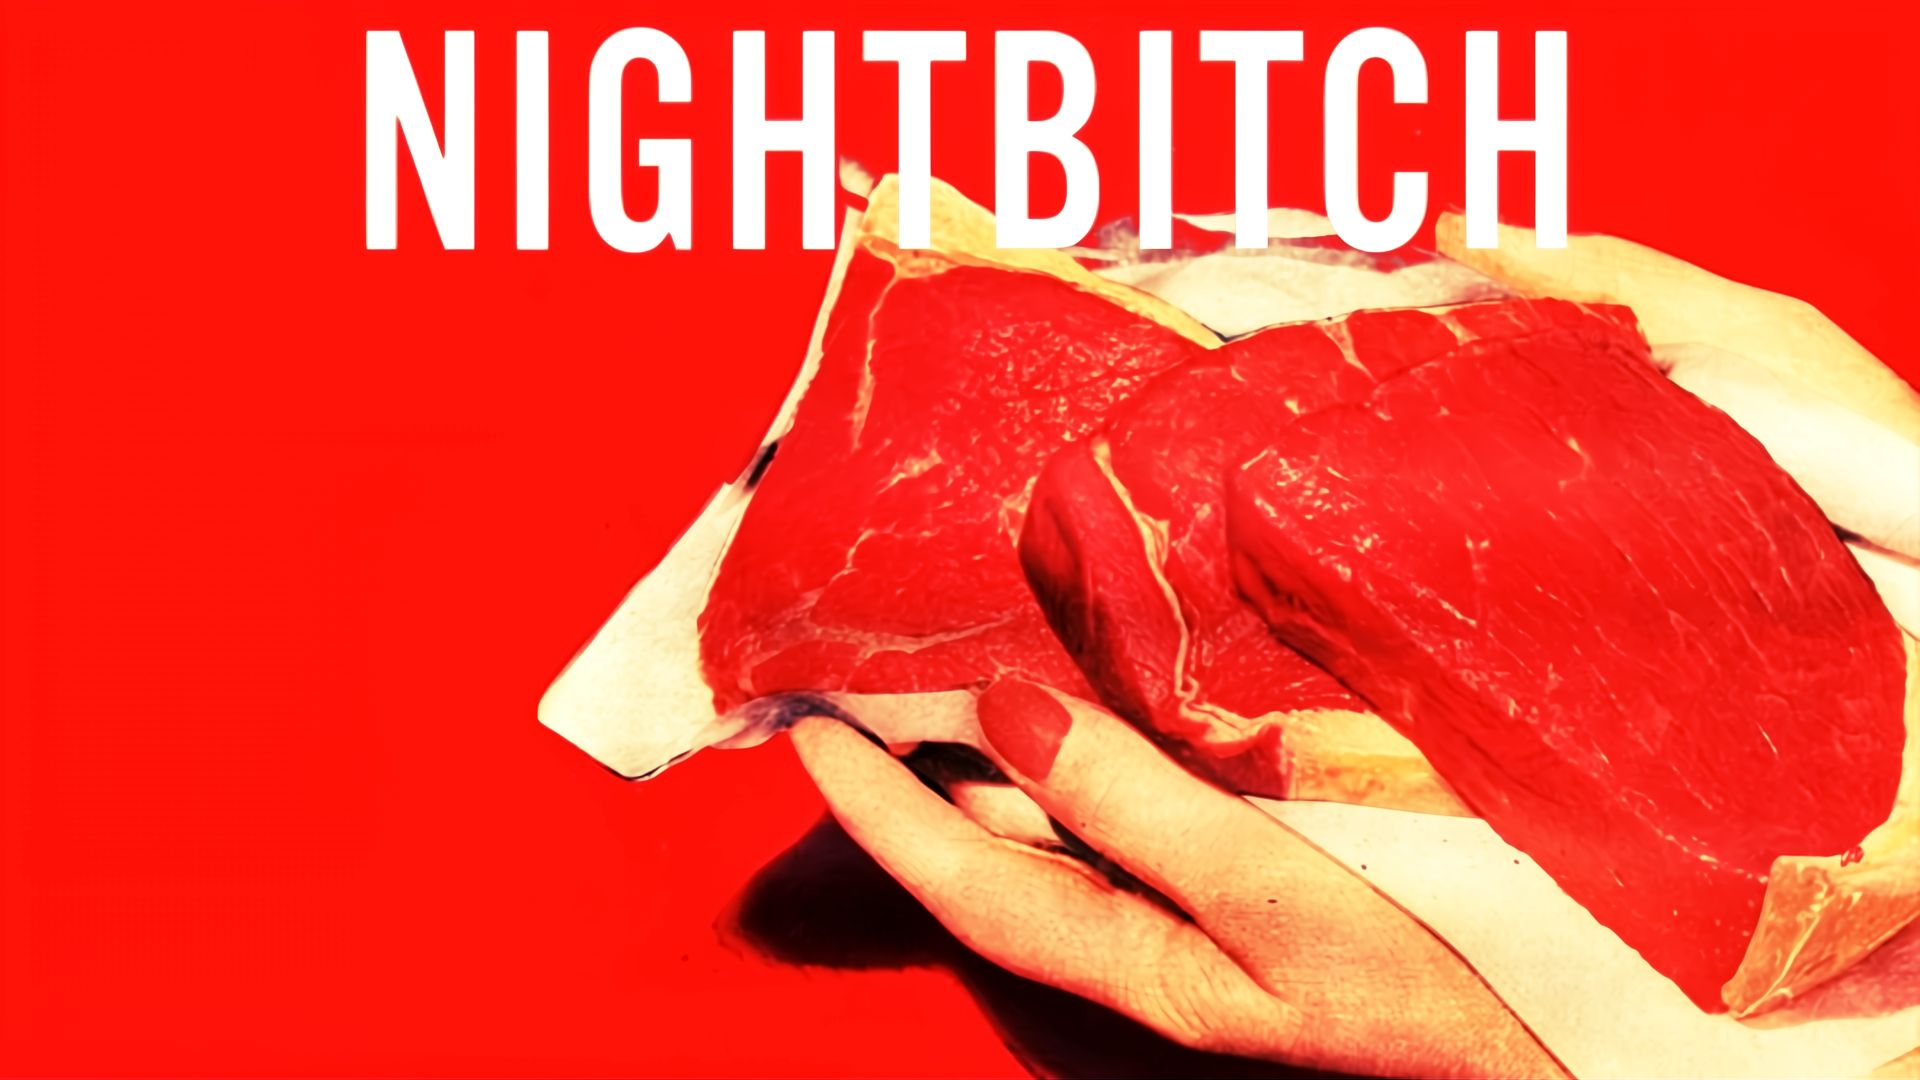 Nightbitch book cover with a hand holding meat